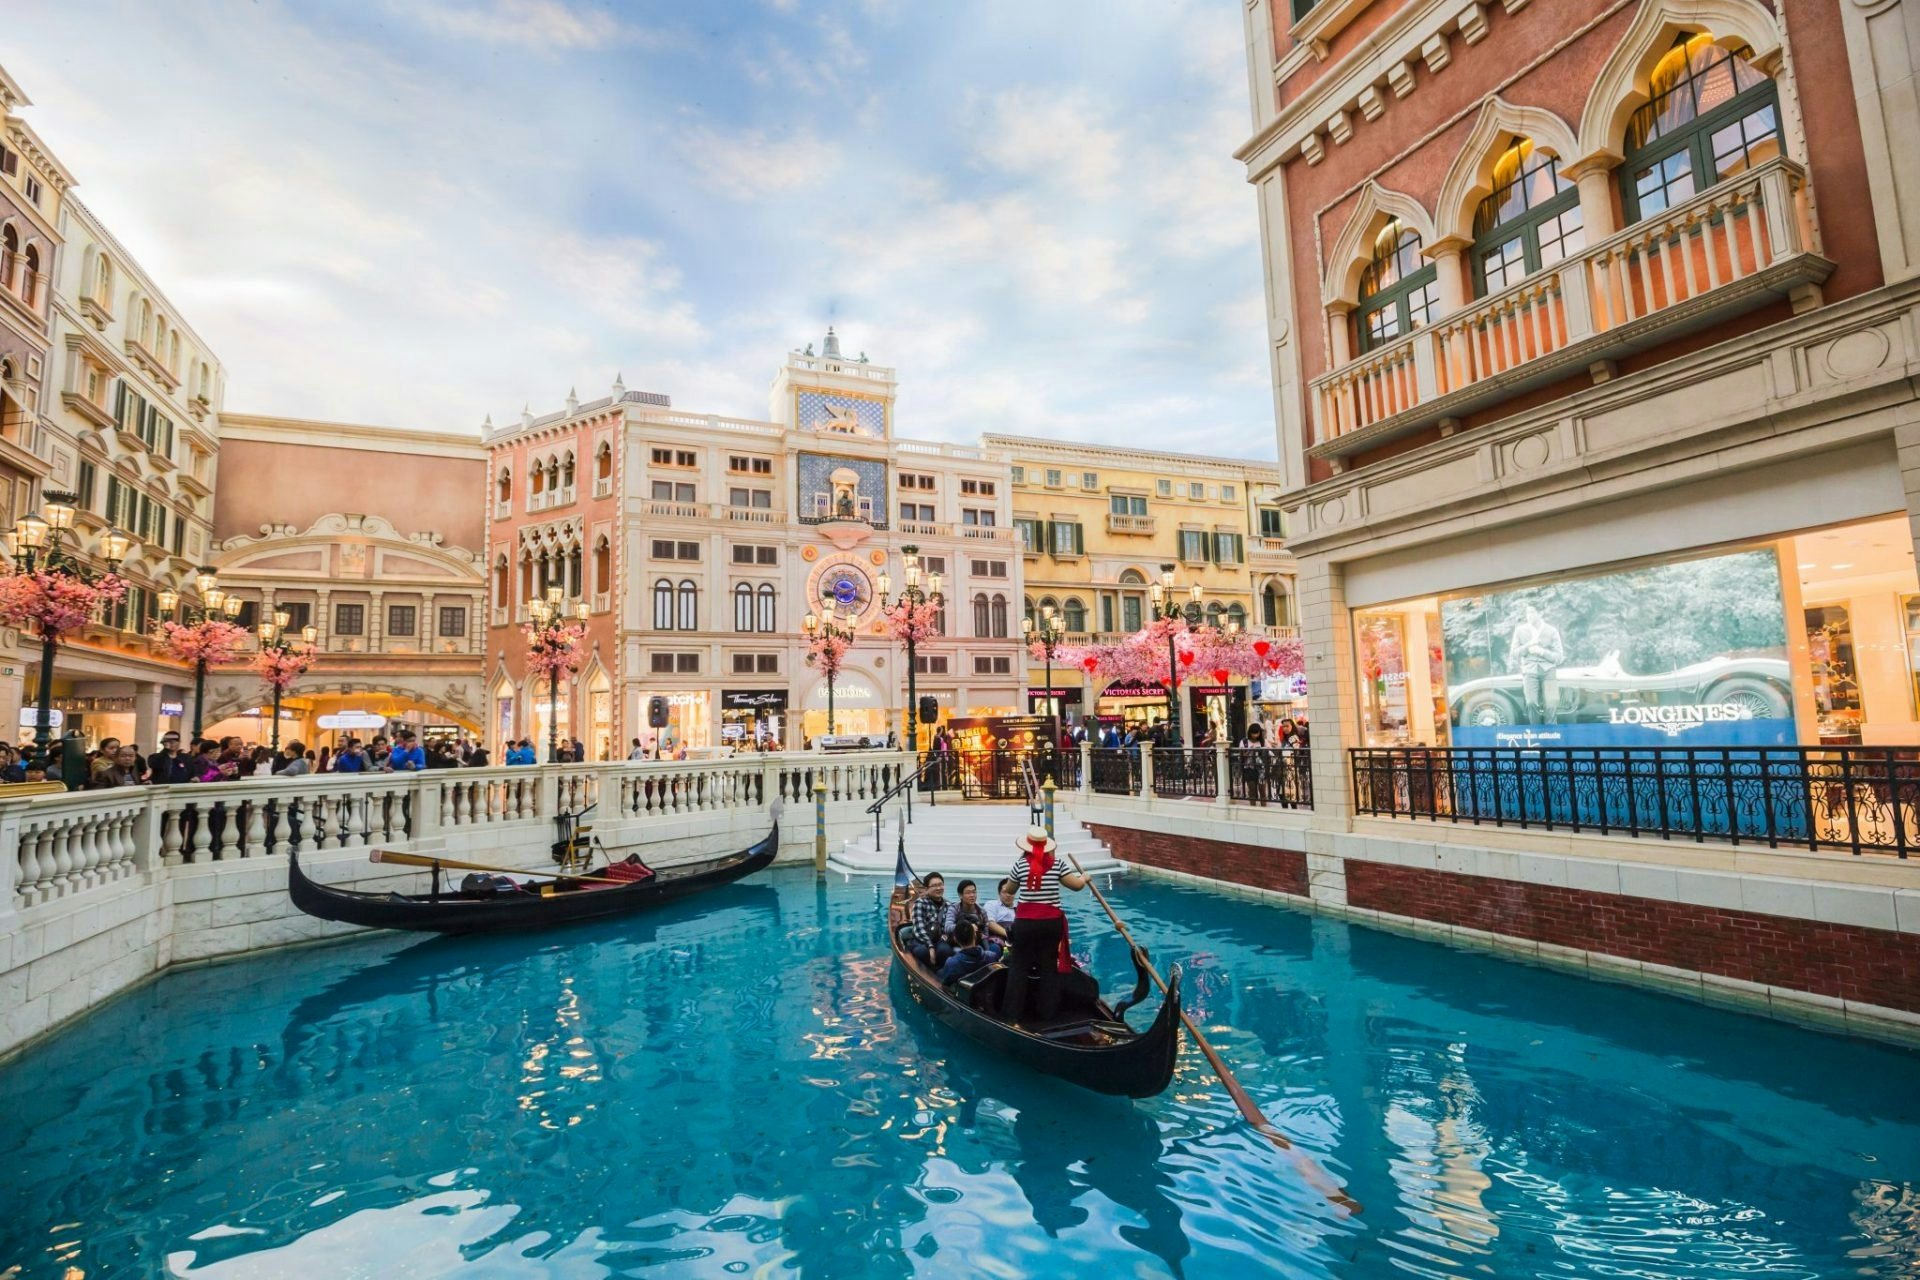 The Venetian Macau, owned by Las Vegas Sands. Despite efforts to diversify the Macanese tourism industry, VIP gambling revenue is growing exponentially, which may cost Macau. Photo: Shutterstock